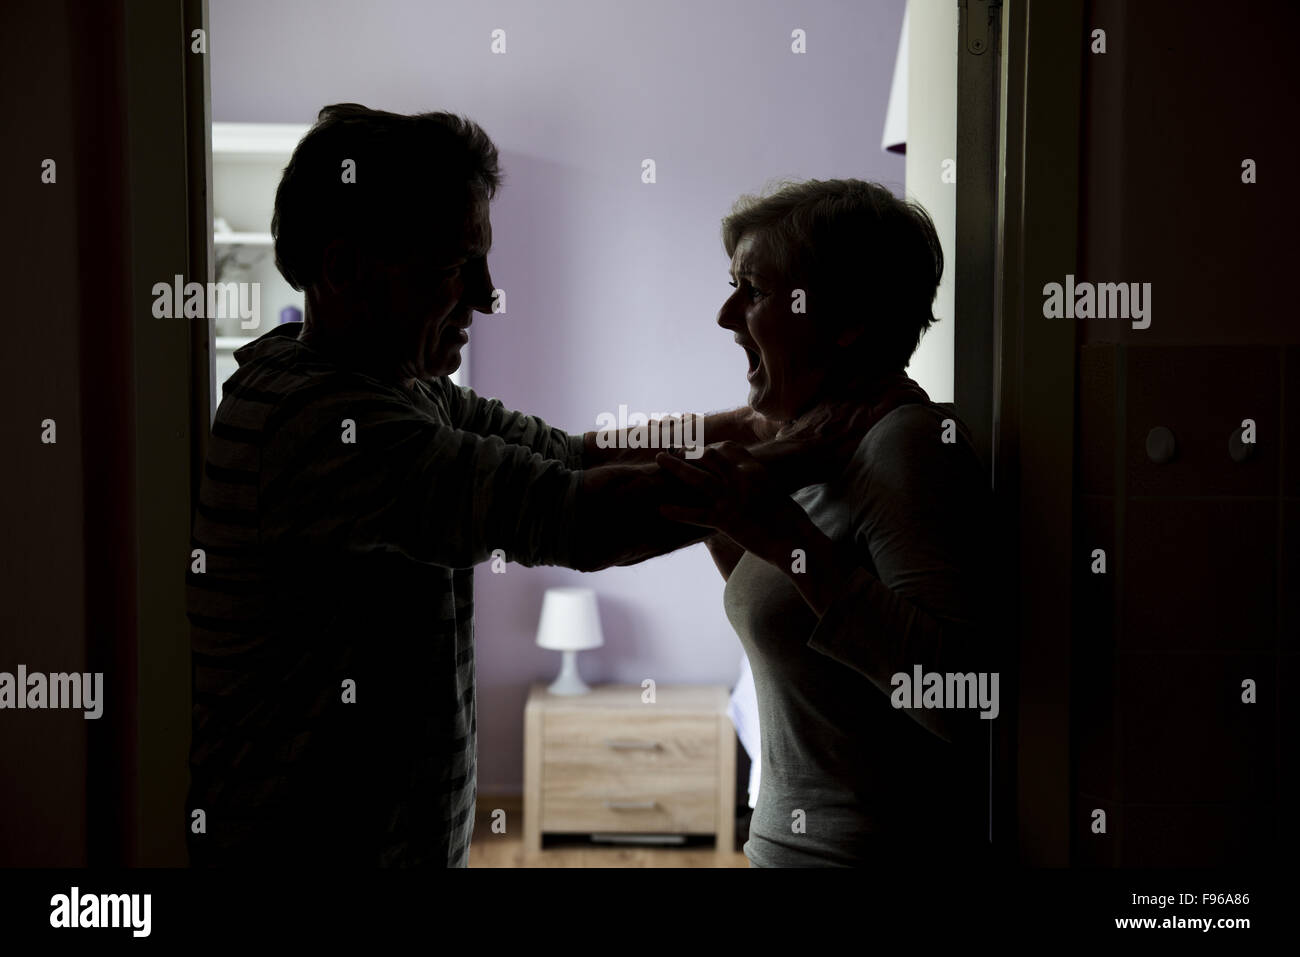 Silhouette of mature couple fighting, the man is physically abusing woman. Woman is victim of domestic violence Stock Photo